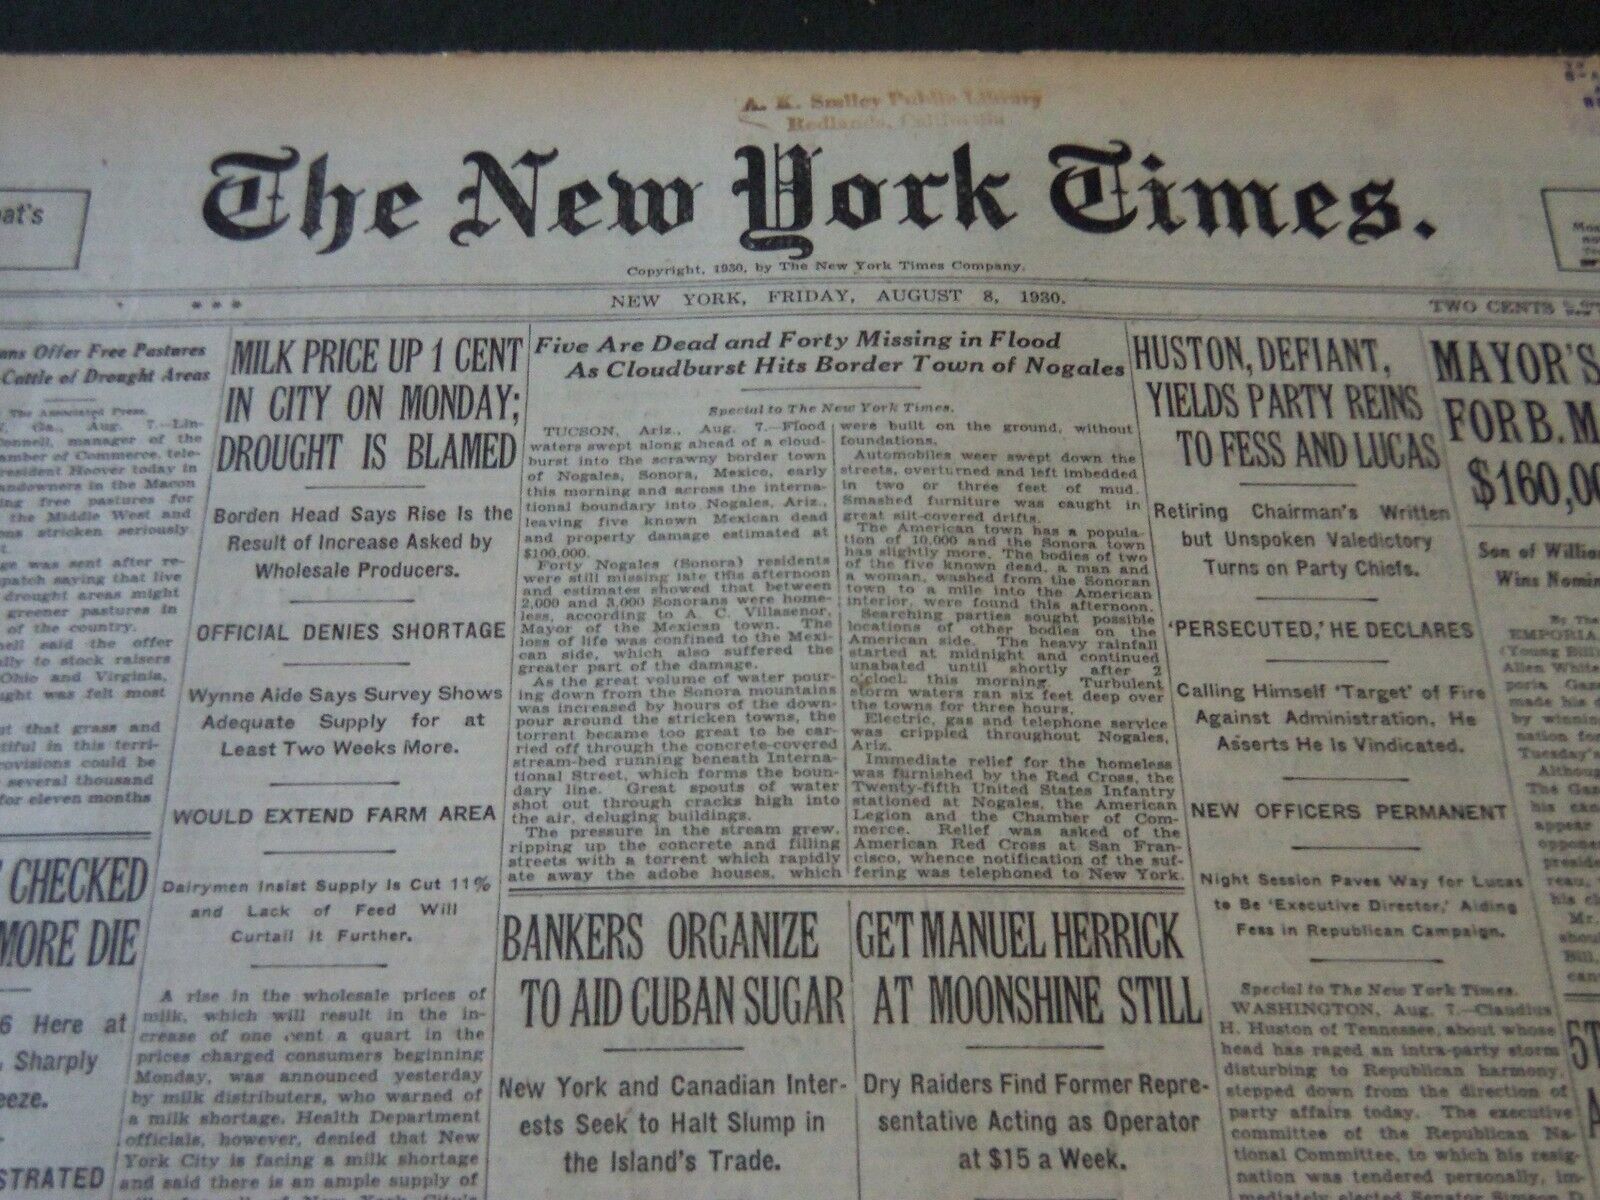 1930 AUGUST 8 NEW YORK TIMES - 5 DEAD 40 MISSING IN NOGALES FLOOD - NT 5623